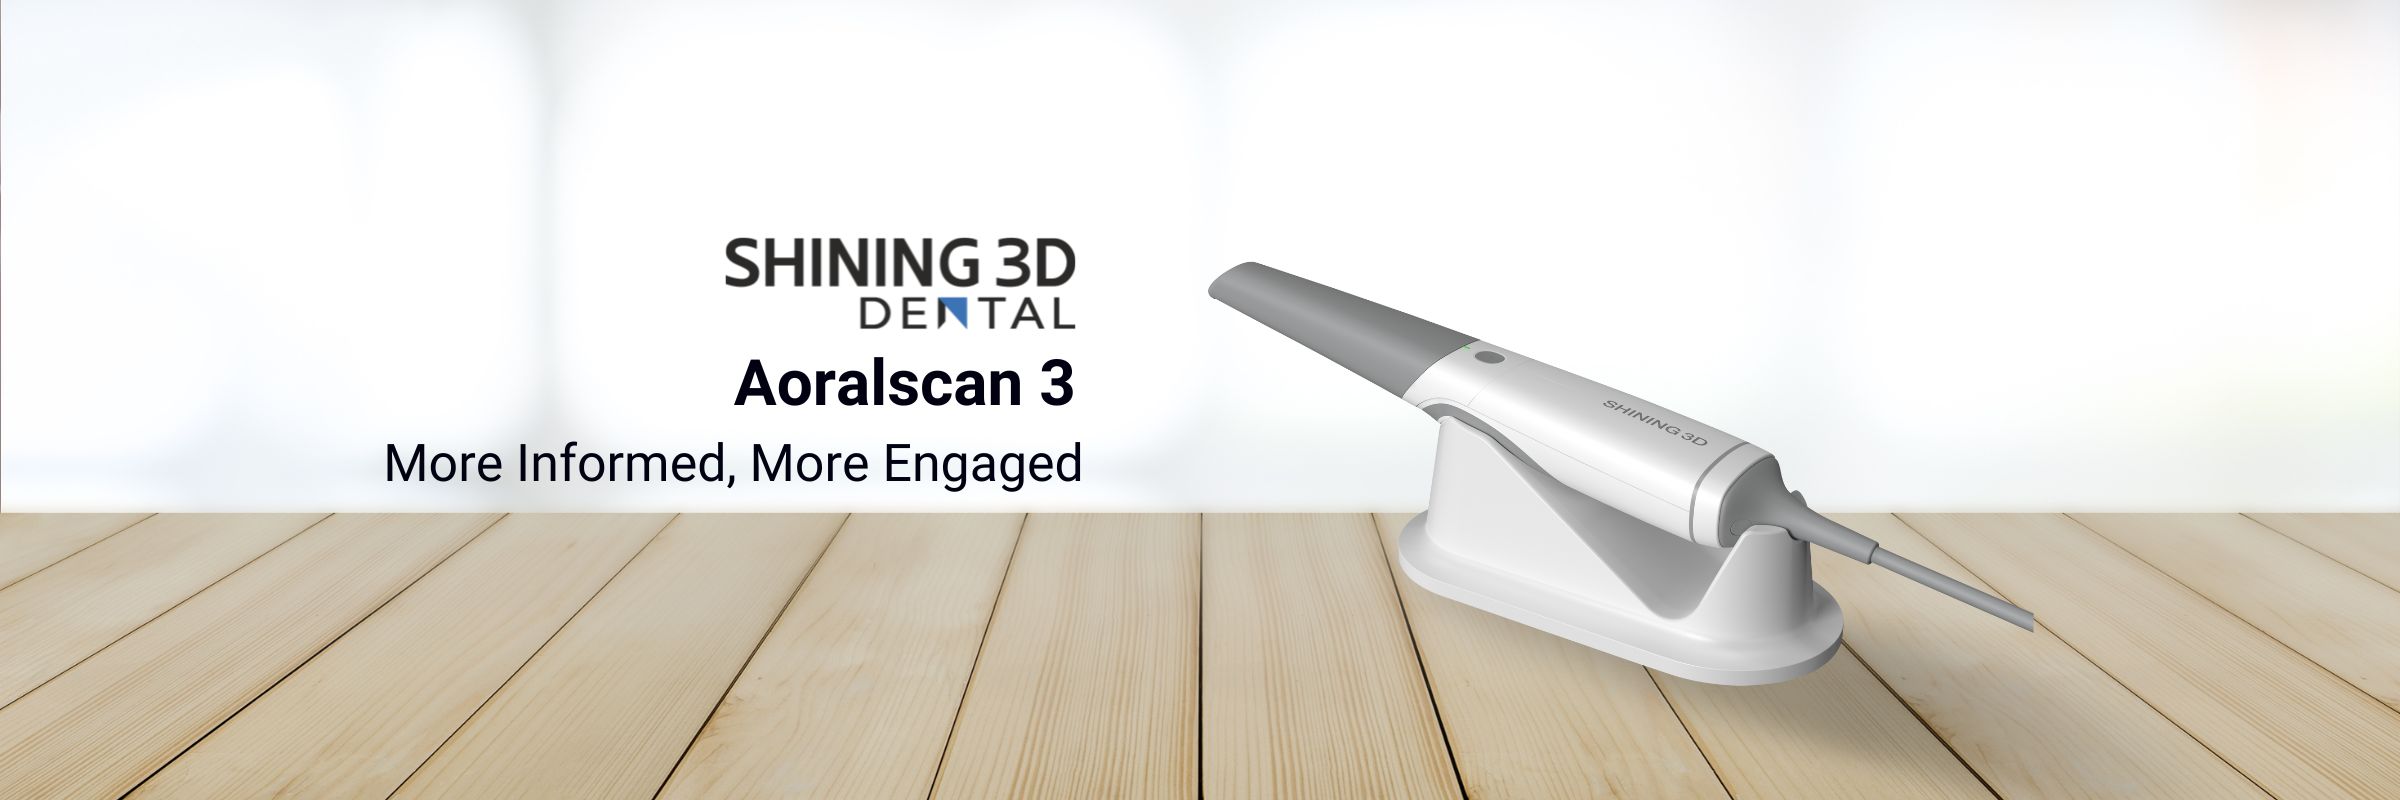 Shinning 3D Aoralscan 3 Product Page Banner